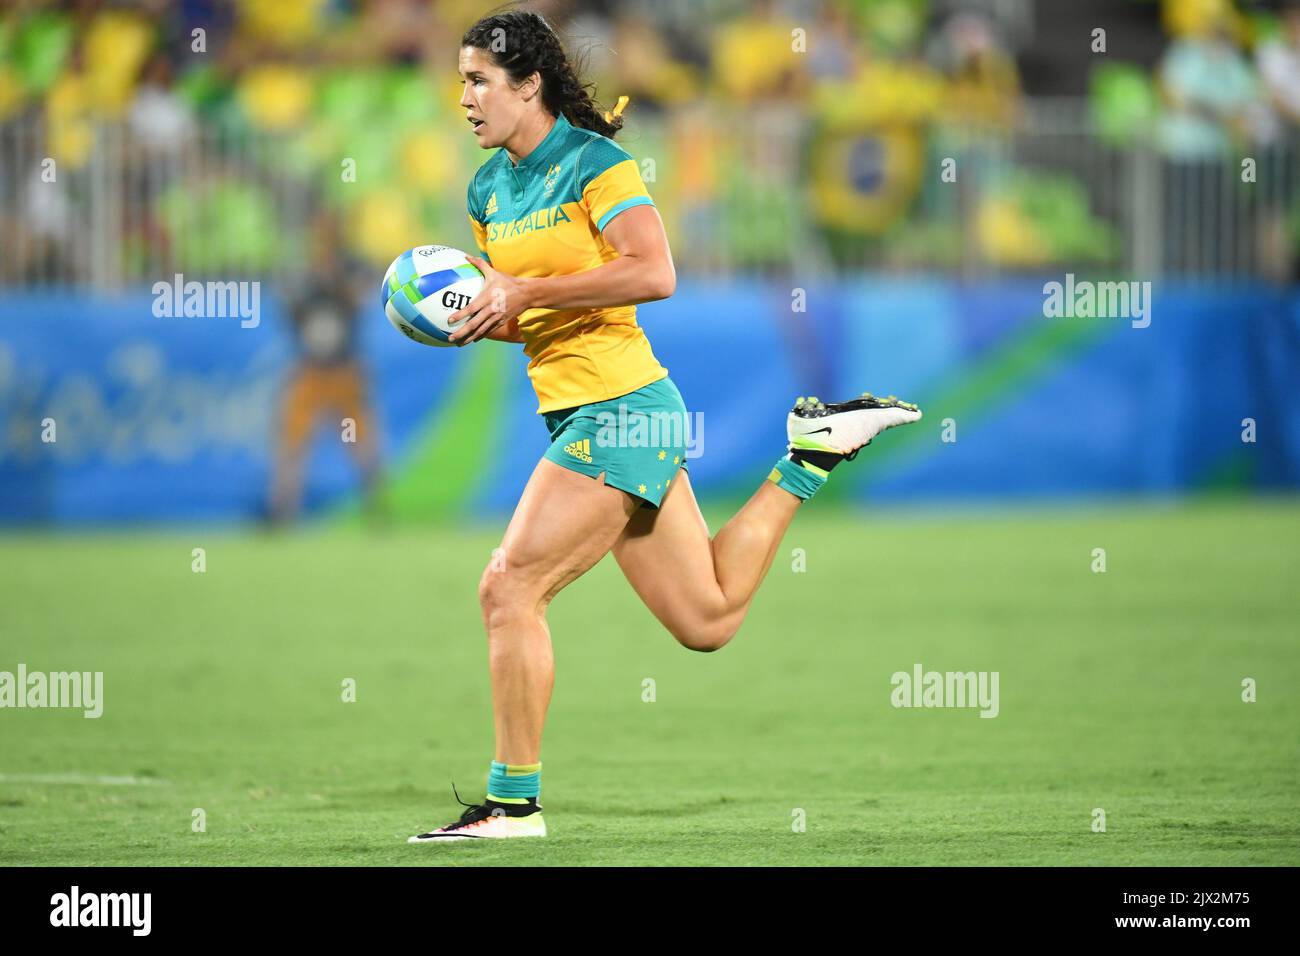 https://c8.alamy.com/comp/2JX2M75/australias-charlotte-caslick-runs-away-to-score-during-their-womens-rugby-sevens-preliminary-match-against-fiji-at-deodoro-stadium-on-day-one-of-the-rio-2016-olympic-games-in-rio-de-janeiro-brazil-saturday-aug-6-2016-aap-imagedean-lewins-no-archiving-editorial-use-only-strictly-editorial-use-only-no-commercial-use-no-books-2JX2M75.jpg